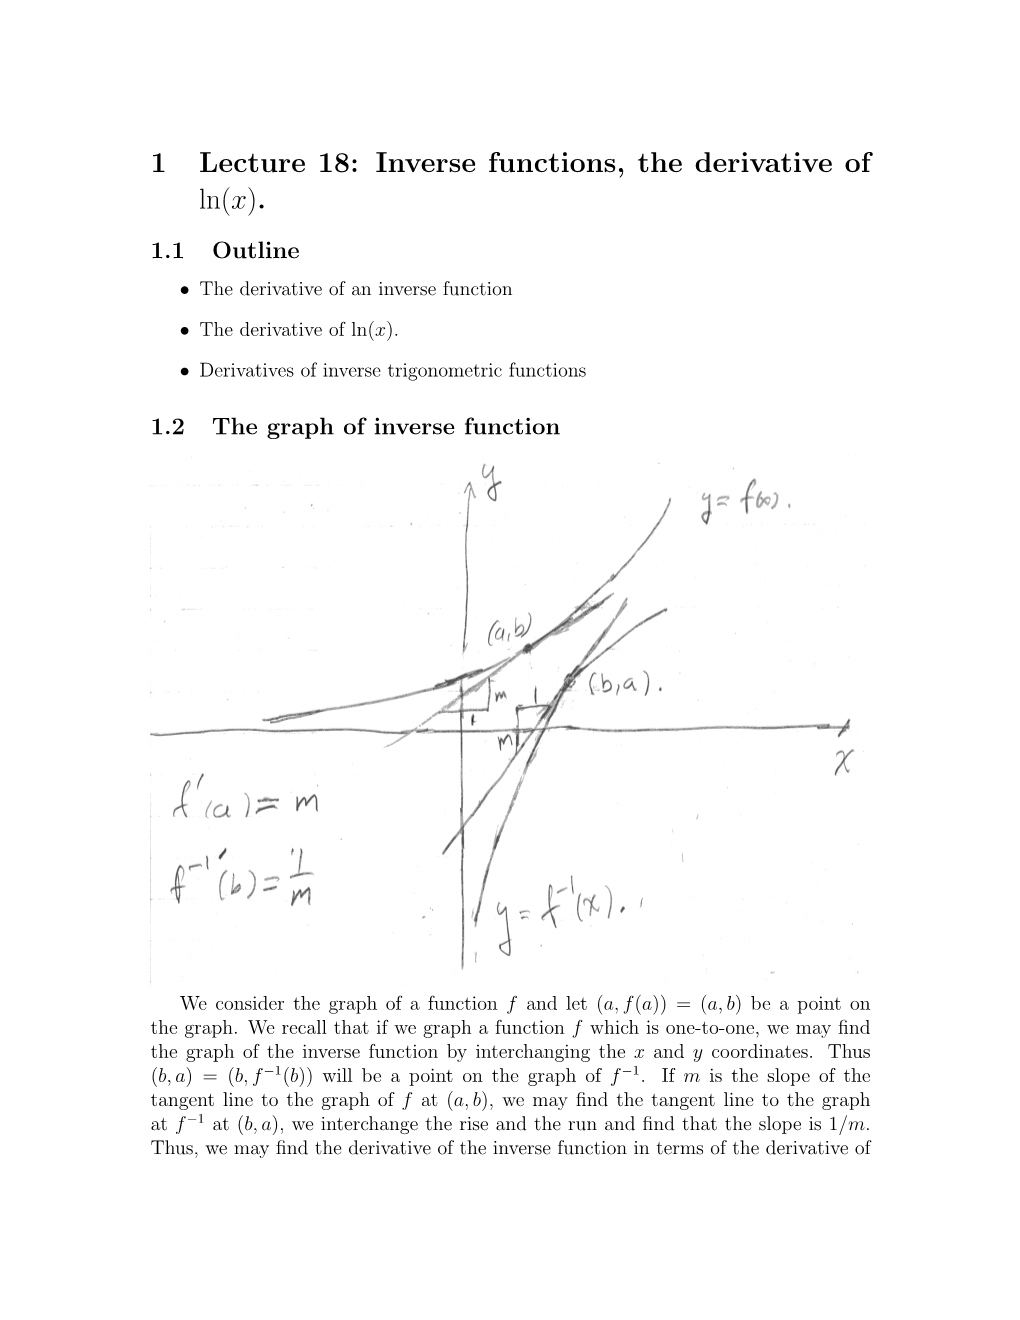 1 Lecture 18: Inverse Functions, the Derivative of Ln(X)